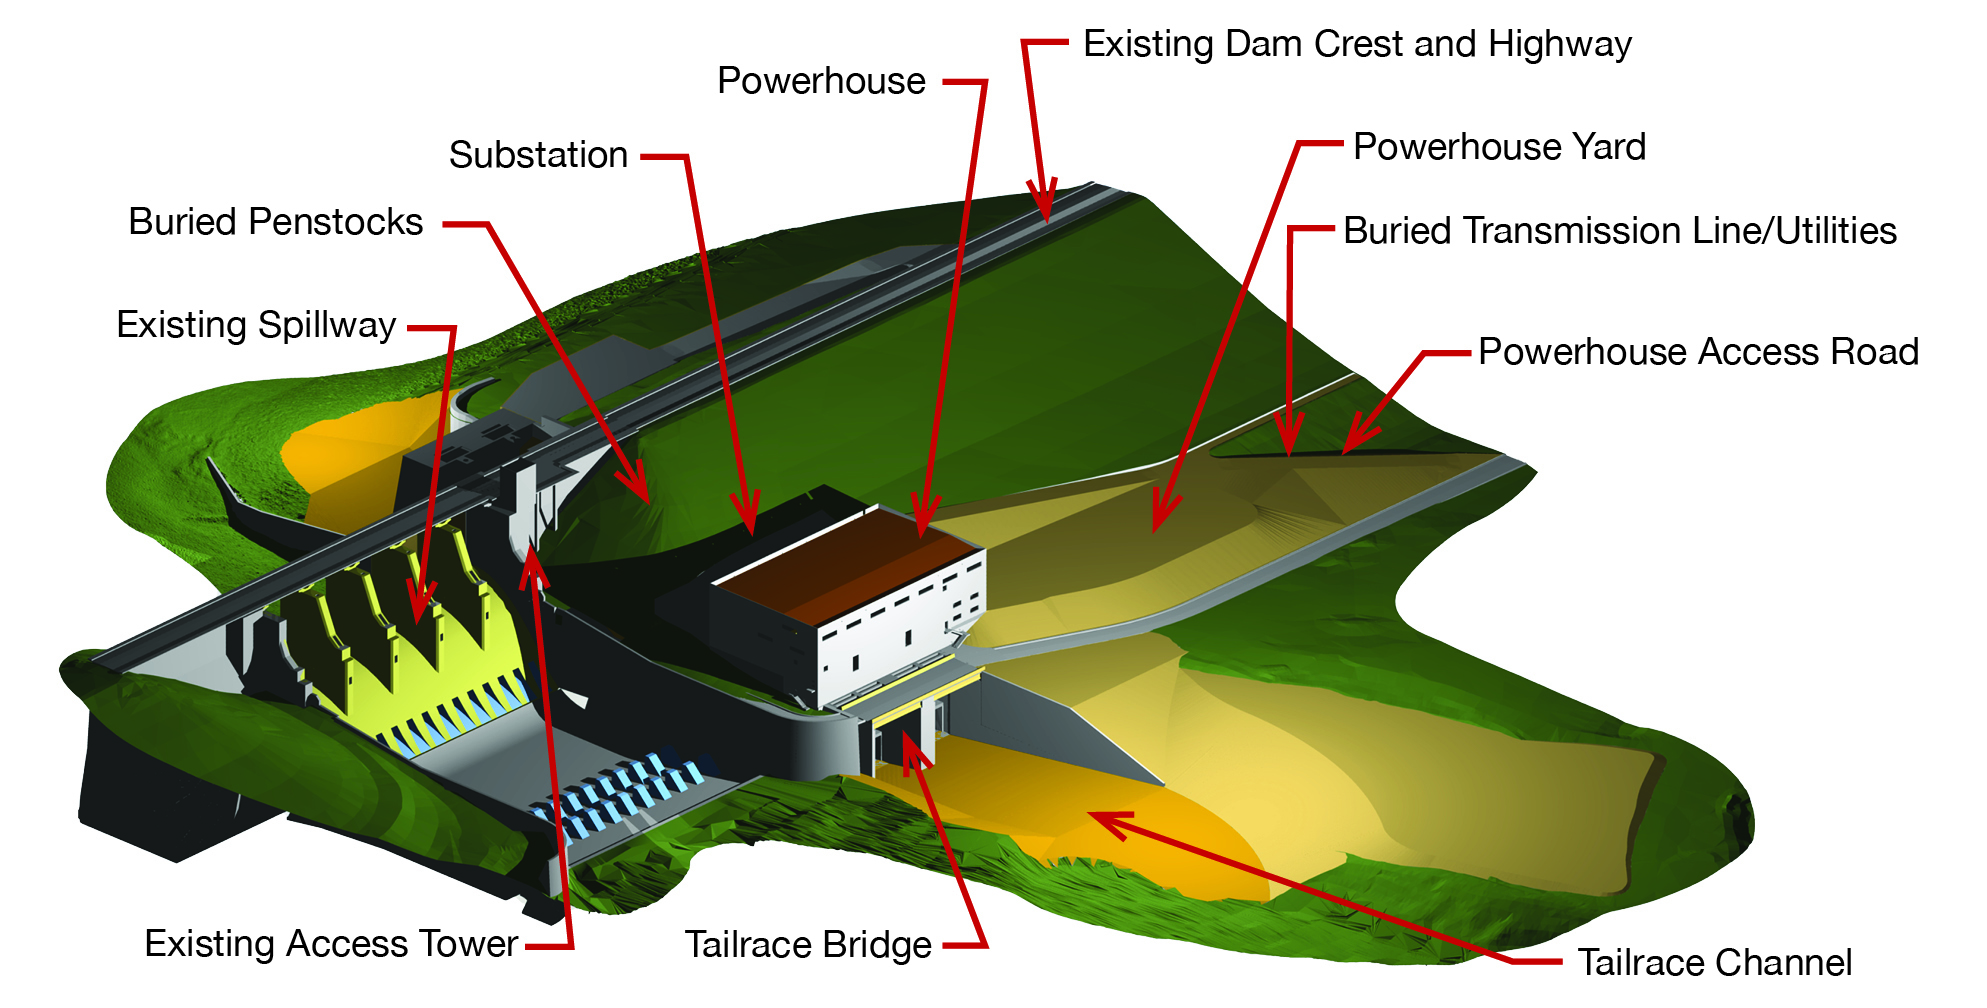 rendering of the different parts of a hydropower project such as spillway, penstocks, and substation